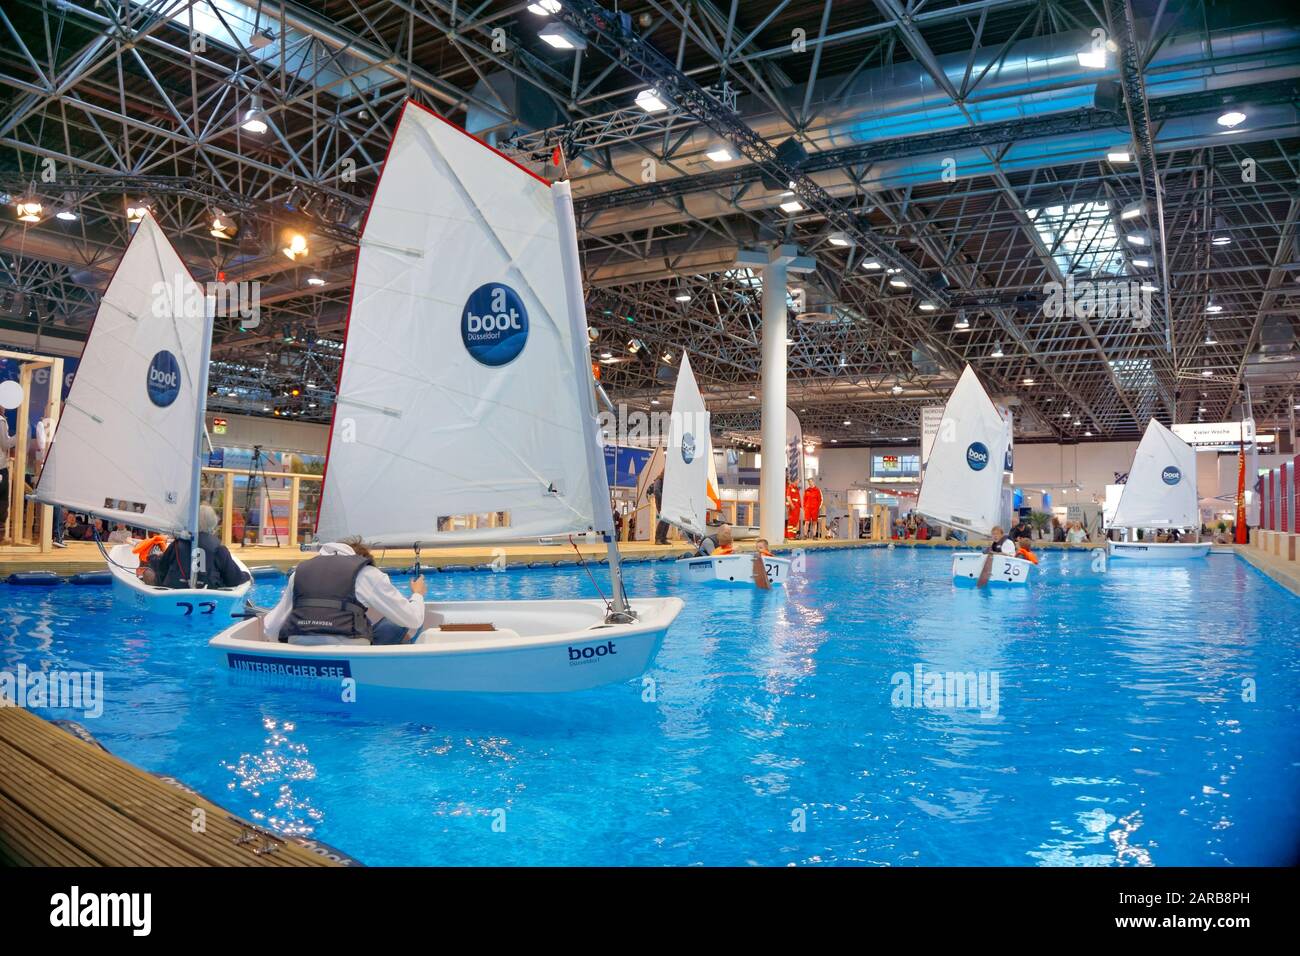 Boot, The German Boat Show held each year in Dusseldorf, Germany. Stock Photo